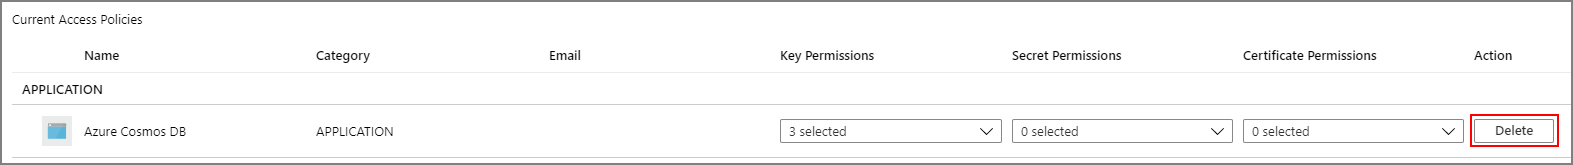 Deleting the access policy for the Azure Cosmos DB principal